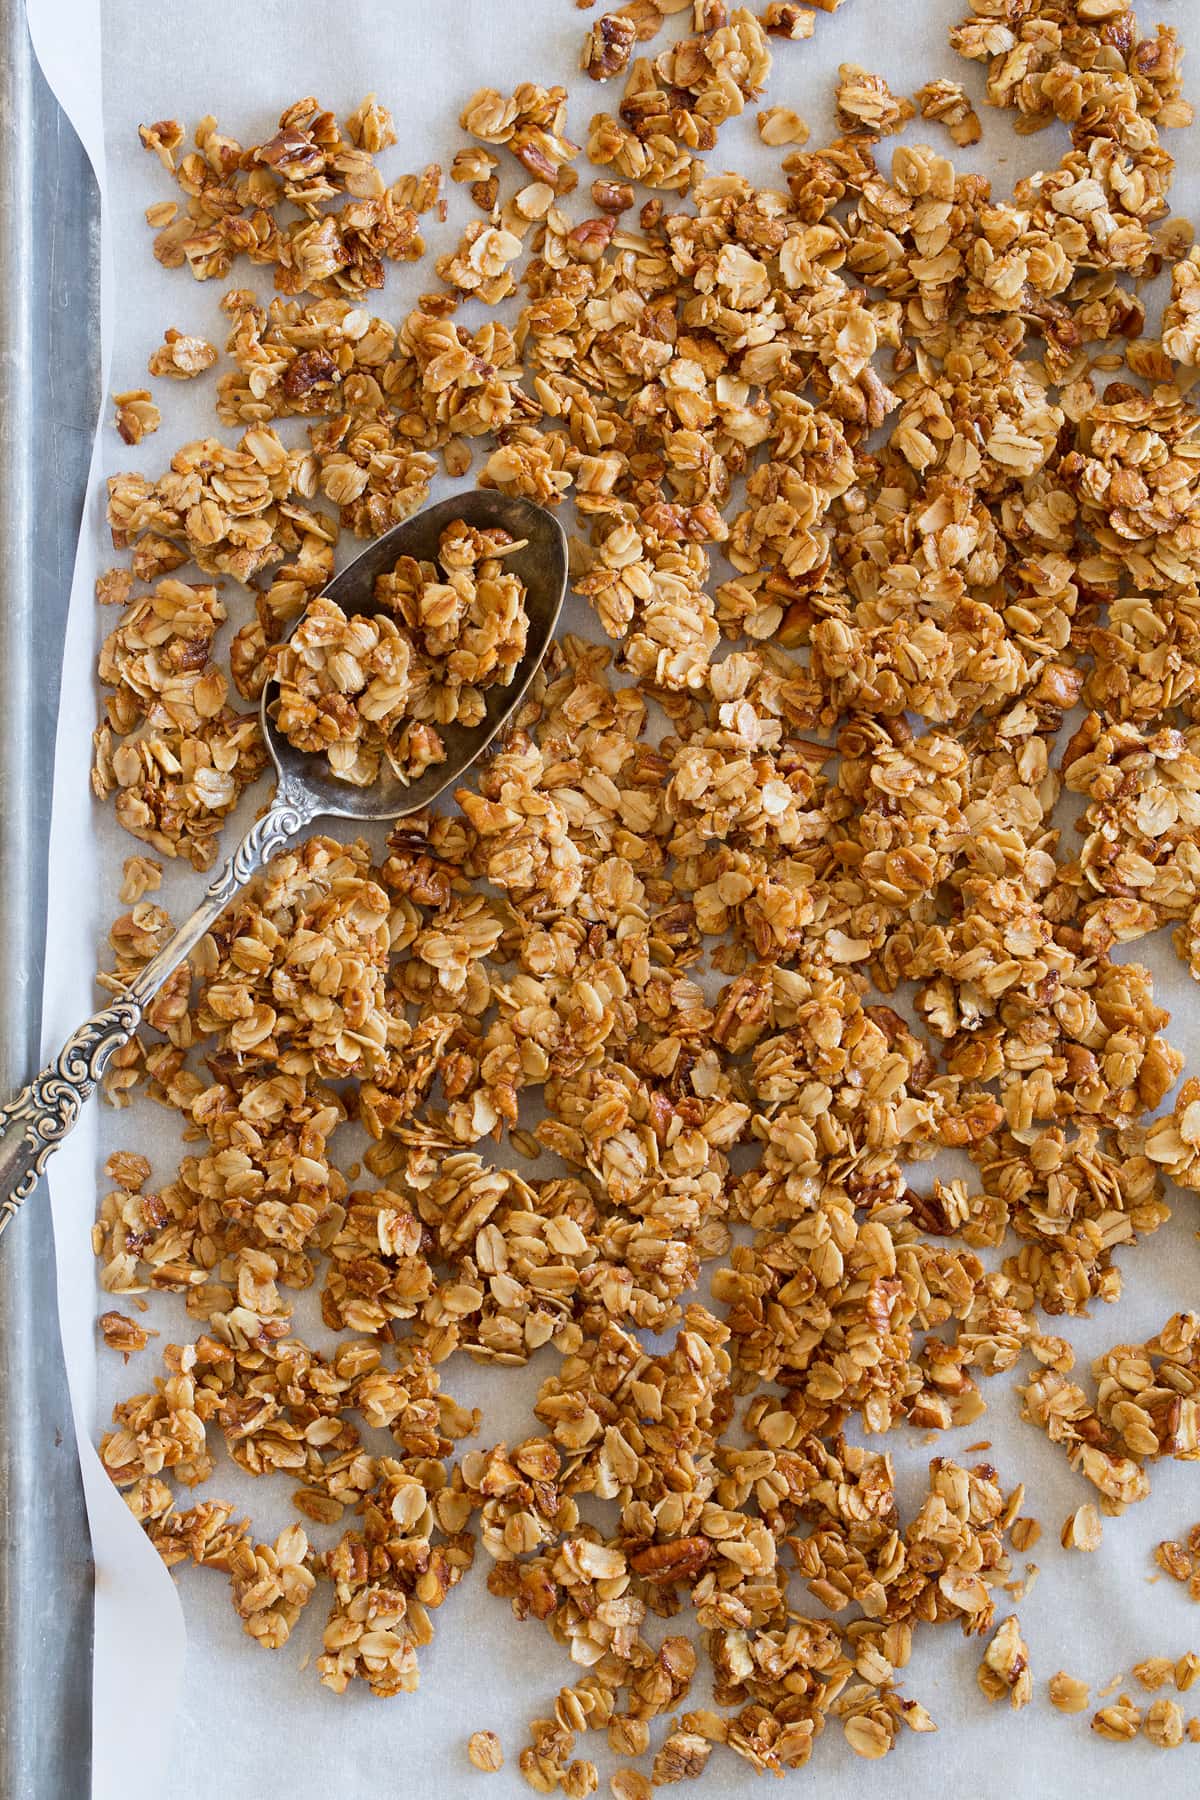 Homemade granola recipe shown spread out on a baking sheet with parchment paper.